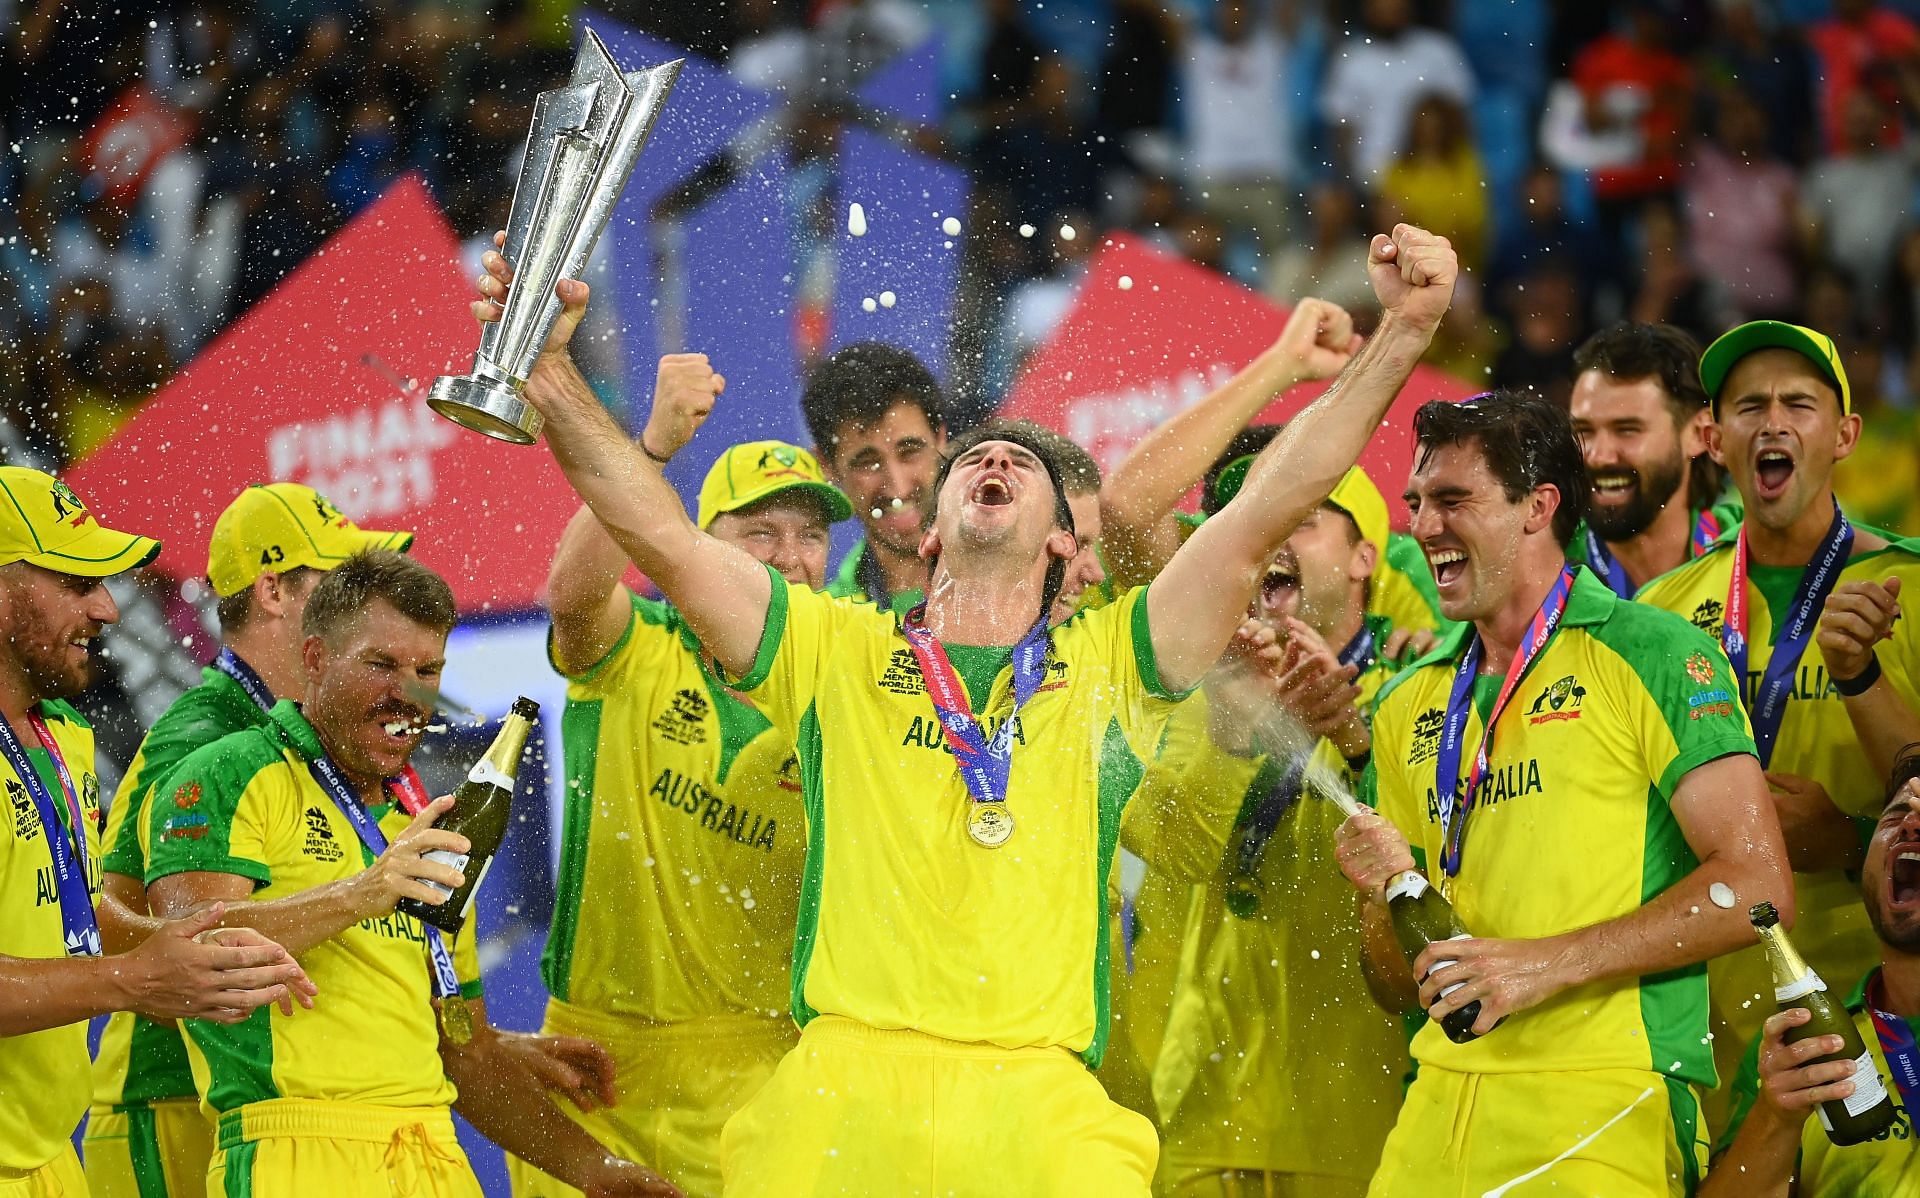 Mitchell Marsh is going to be a player in demand at the IPL 2022 Auction.